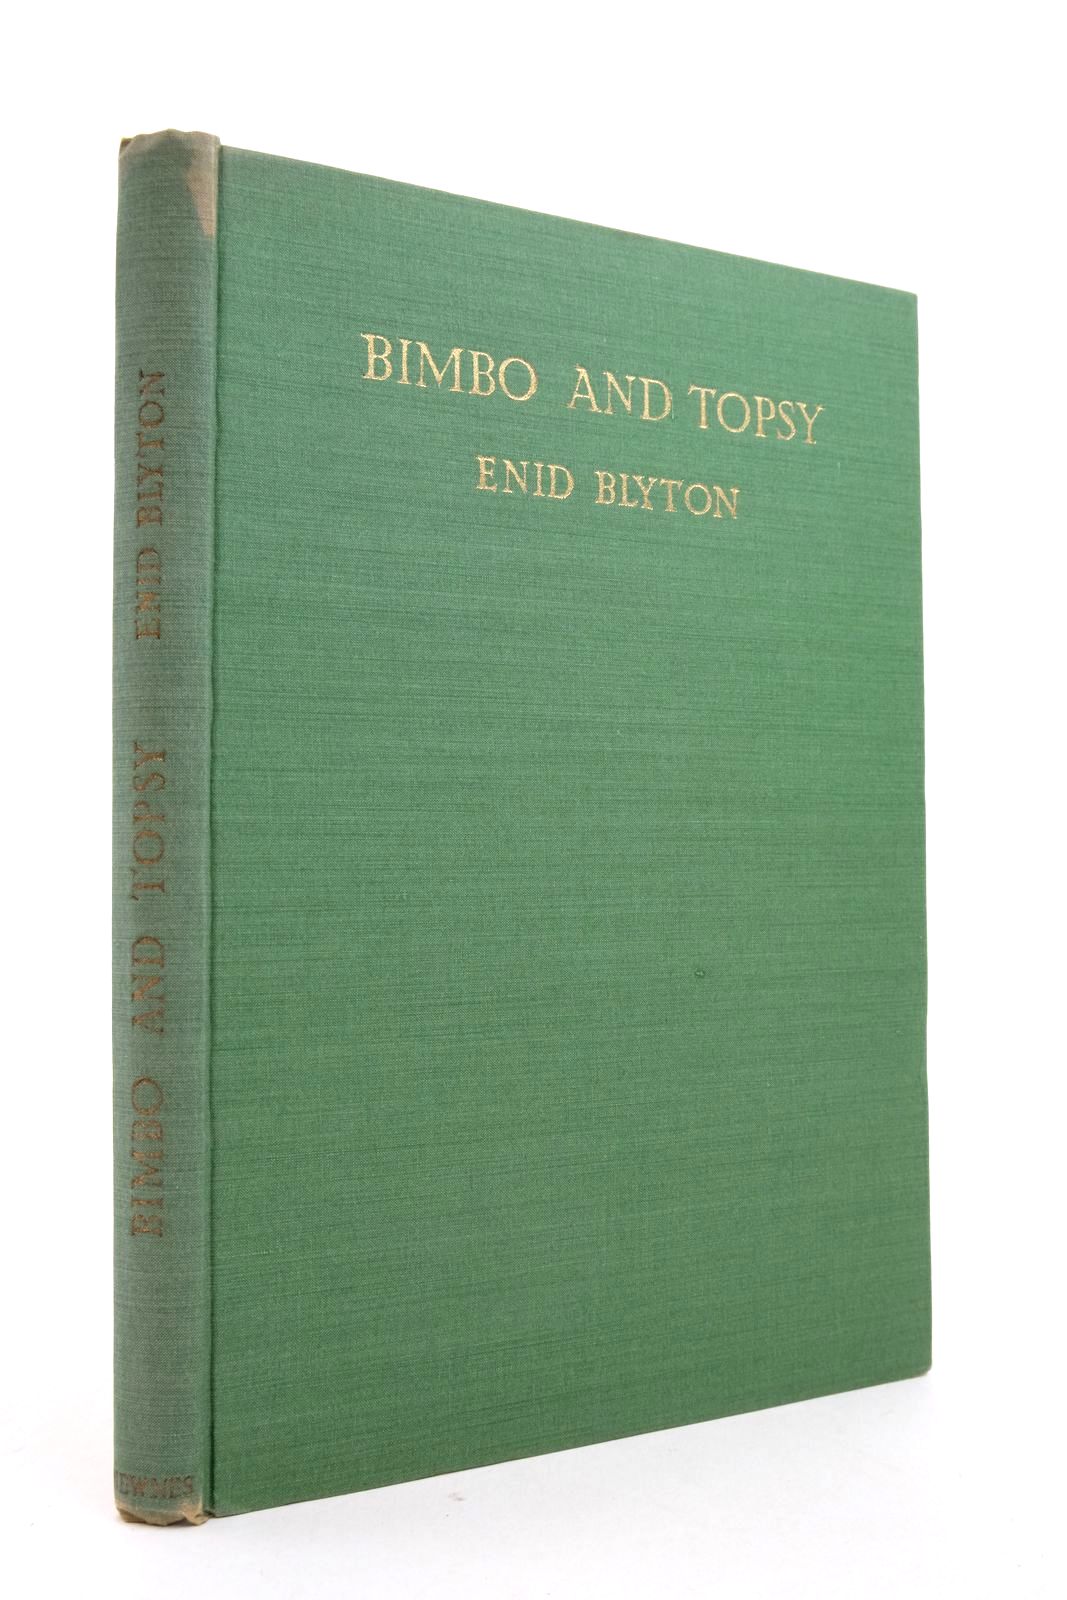 Photo of BIMBO AND TOPSY written by Blyton, Enid illustrated by Gee, Lucy published by George Newnes Ltd. (STOCK CODE: 2138008)  for sale by Stella & Rose's Books